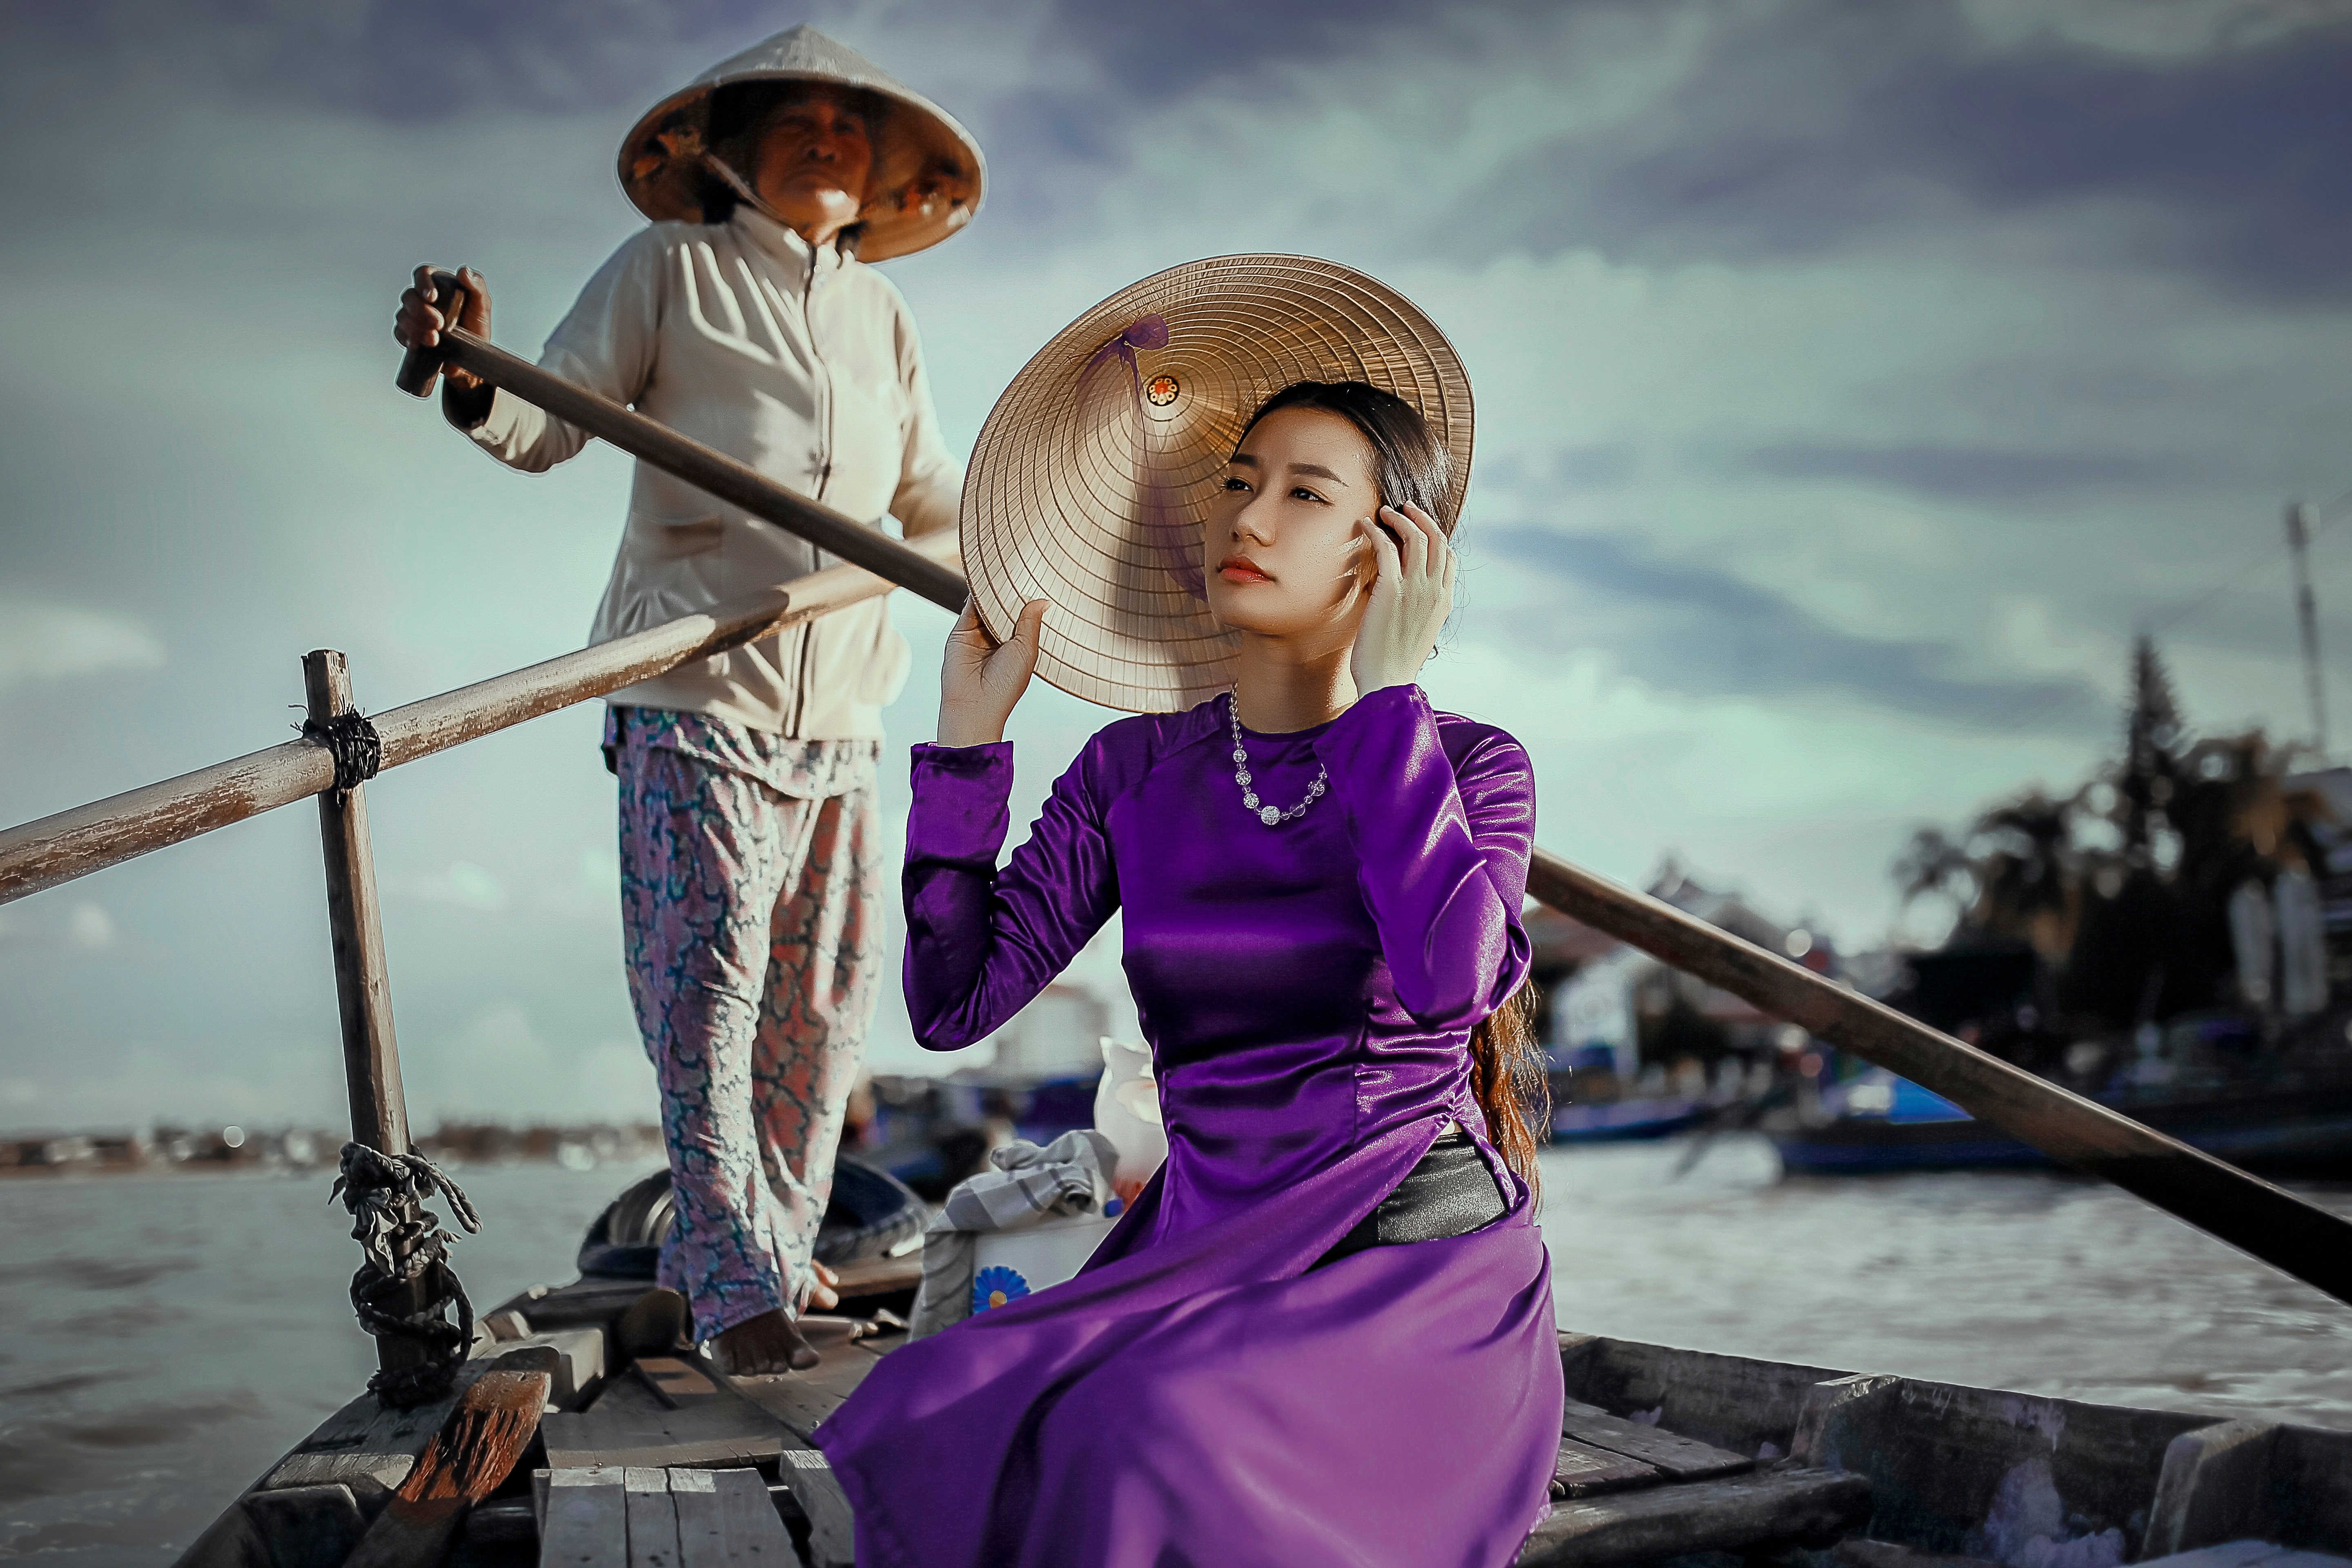 man paddling the boat while woman riding in purple long sleeve dress and holding brown hat